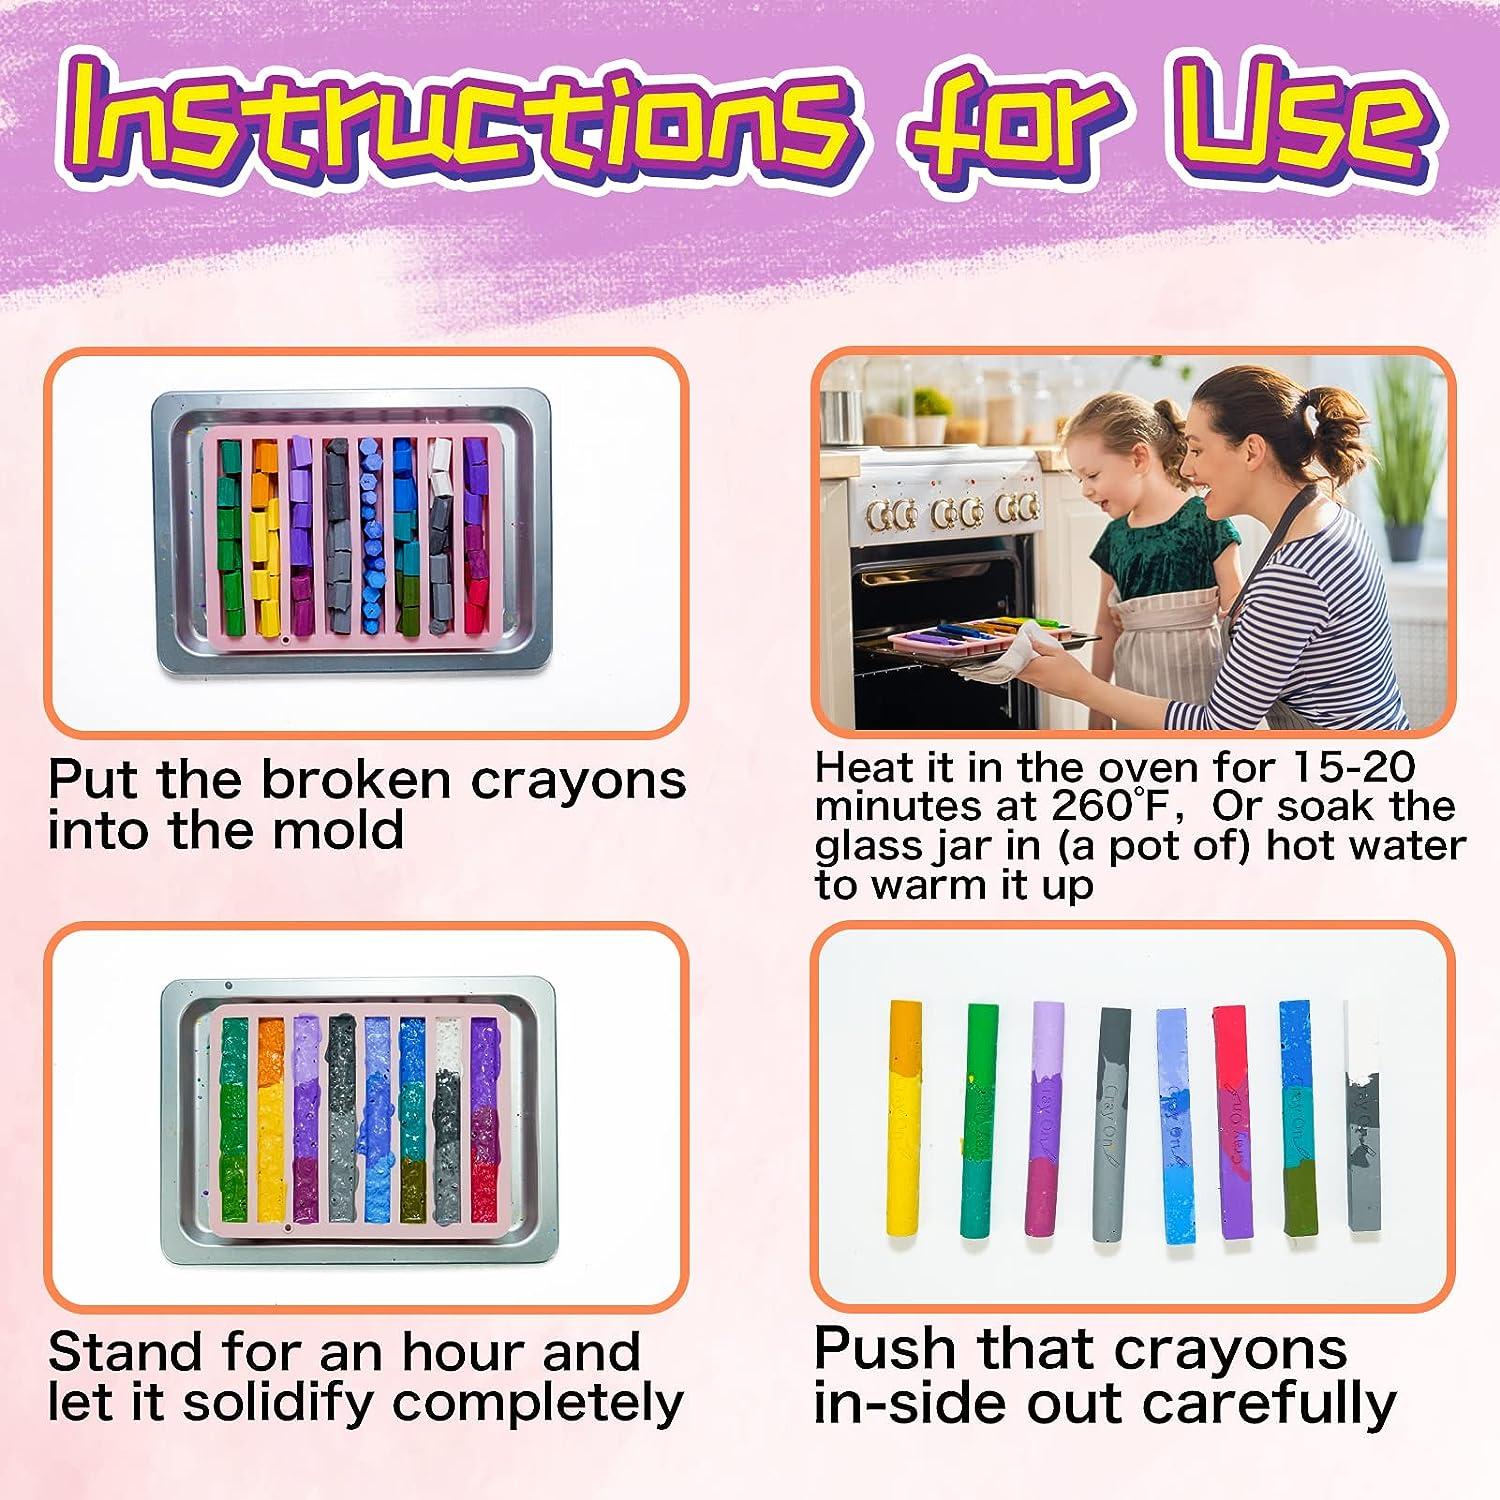 3 Mistakes to Avoid When Molding Crayons into New Shapes - Yea